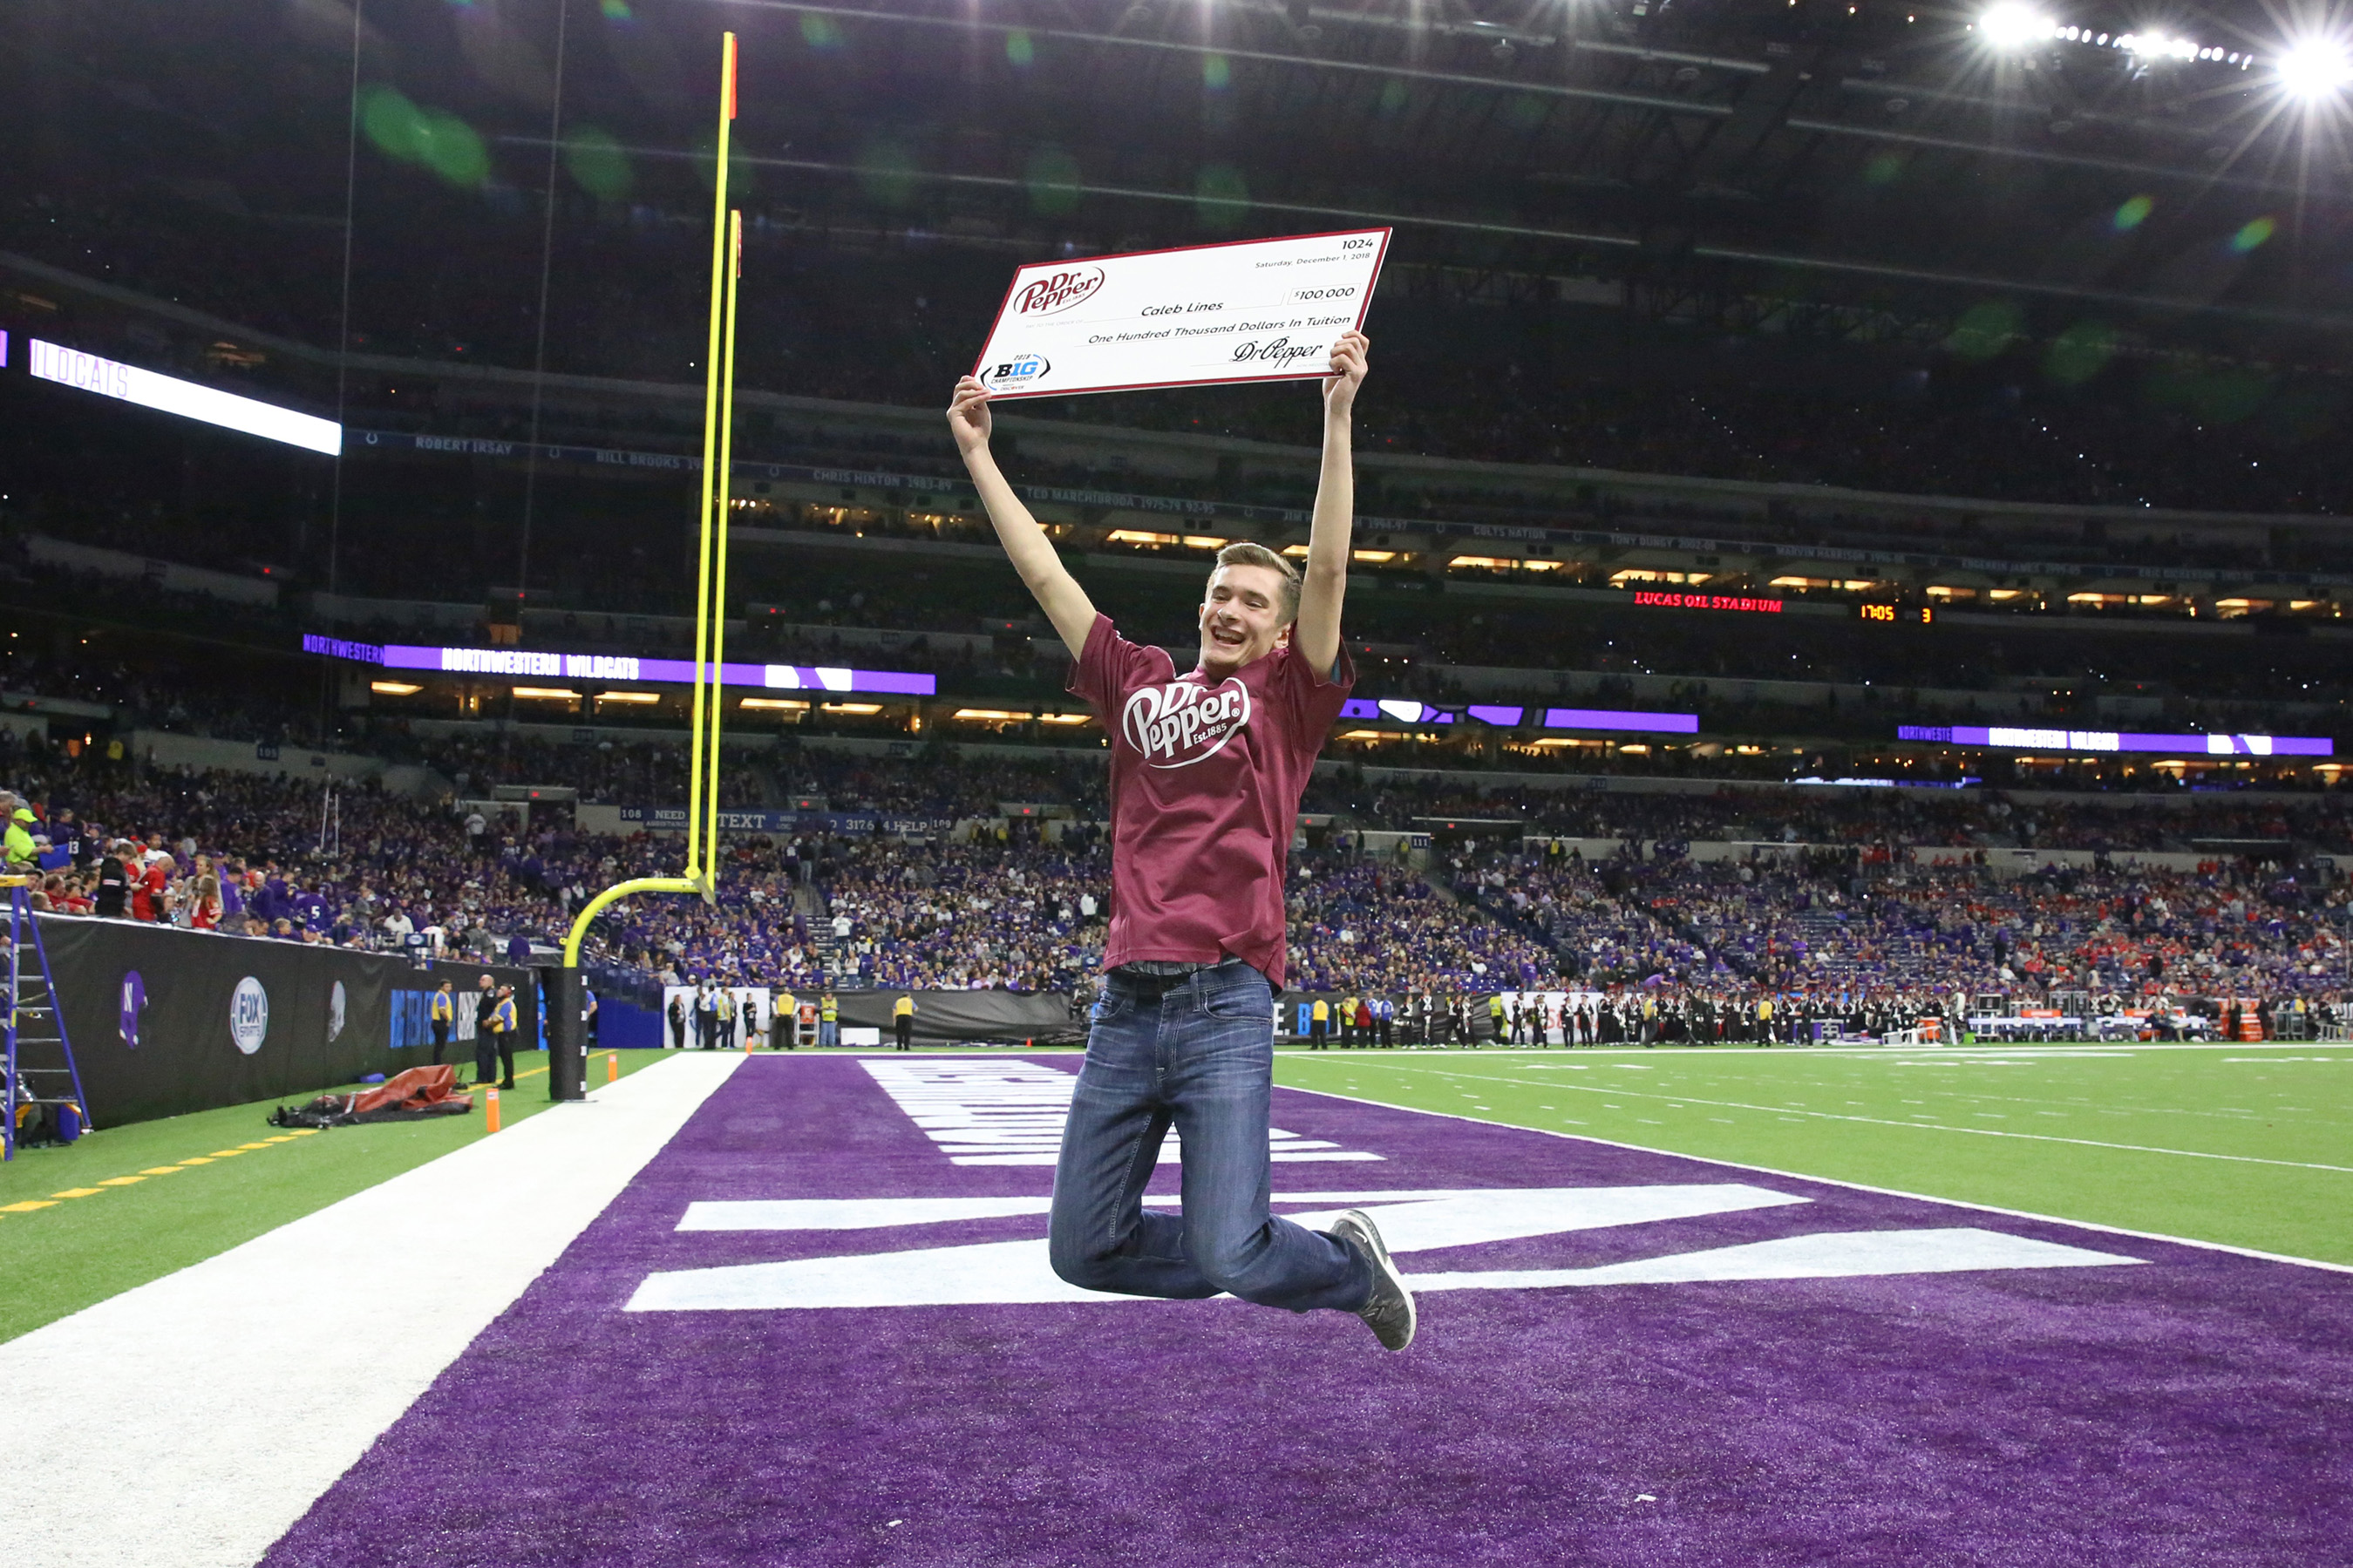 Caleb Lines was presented with a check for $100,000 in tuition after winning the Dr Pepper Tuition Giveaway during halftime of the Big Ten Conference Championship